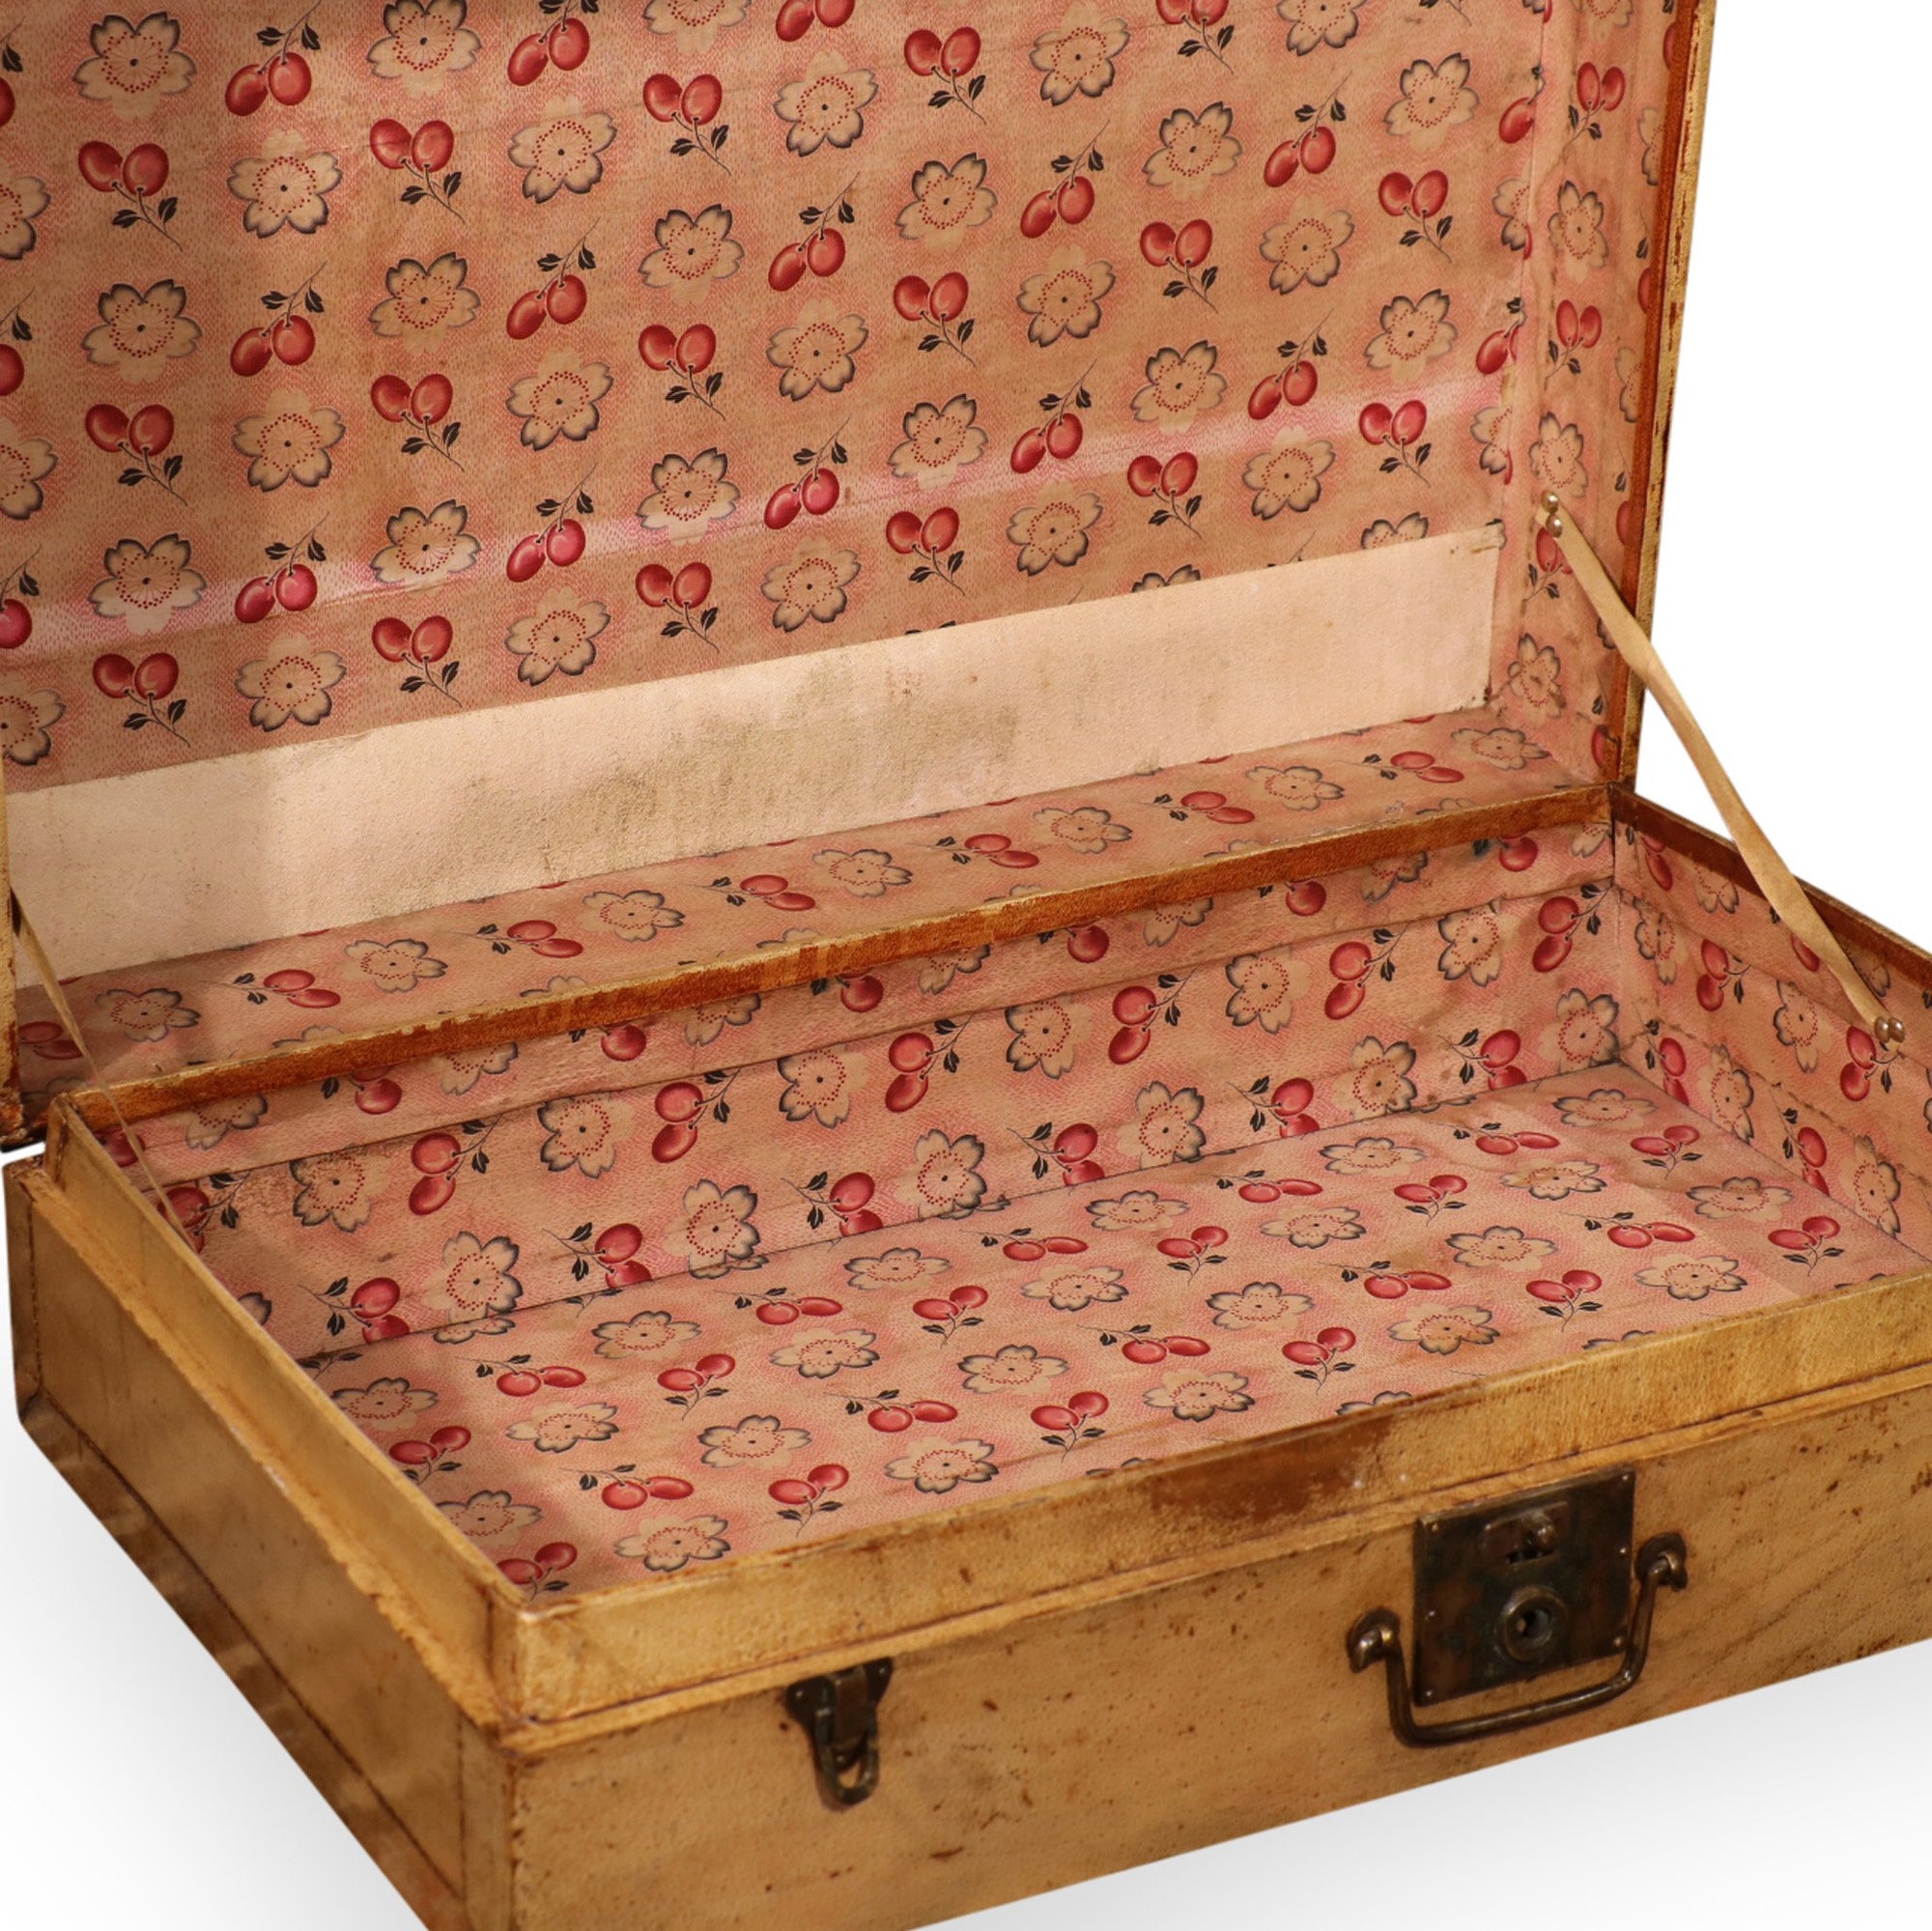 Pale Leather Trunk from Shanghai - Circa 1920 - 70 x 46.5 x 21  (wxdxh) - M284